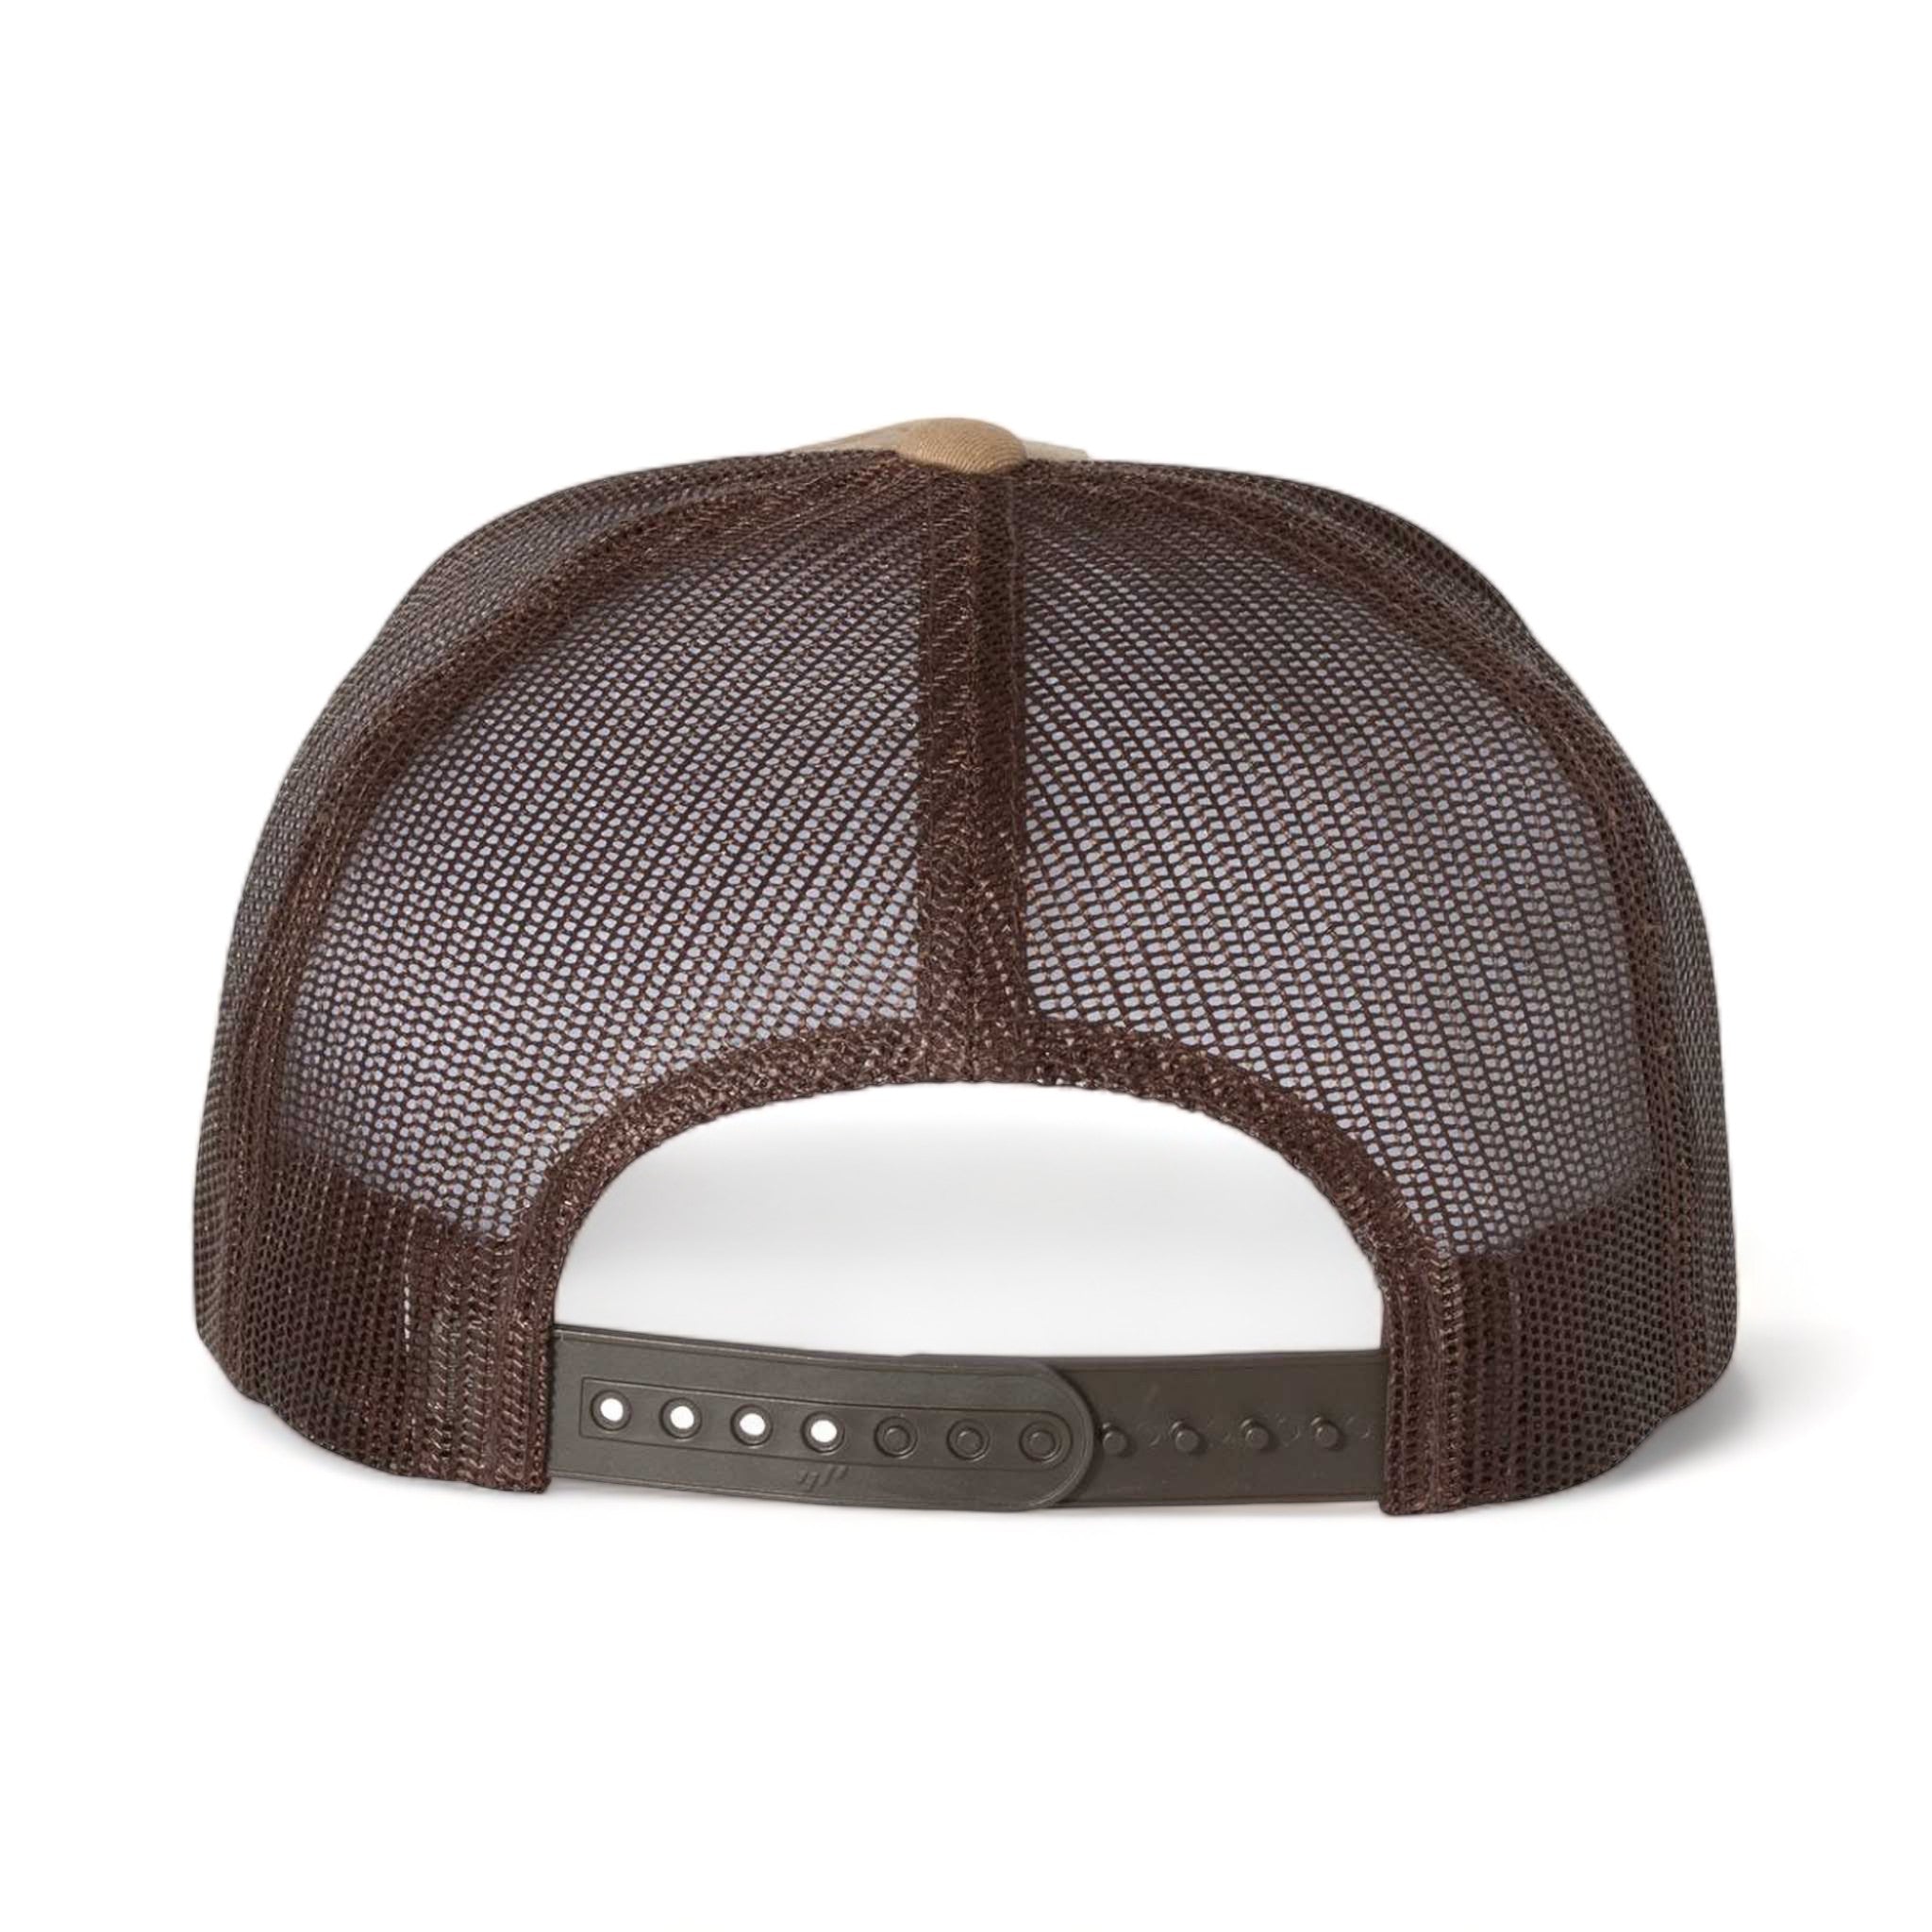 Back view of YP Classics 6006 custom hat in multicam arid and brown